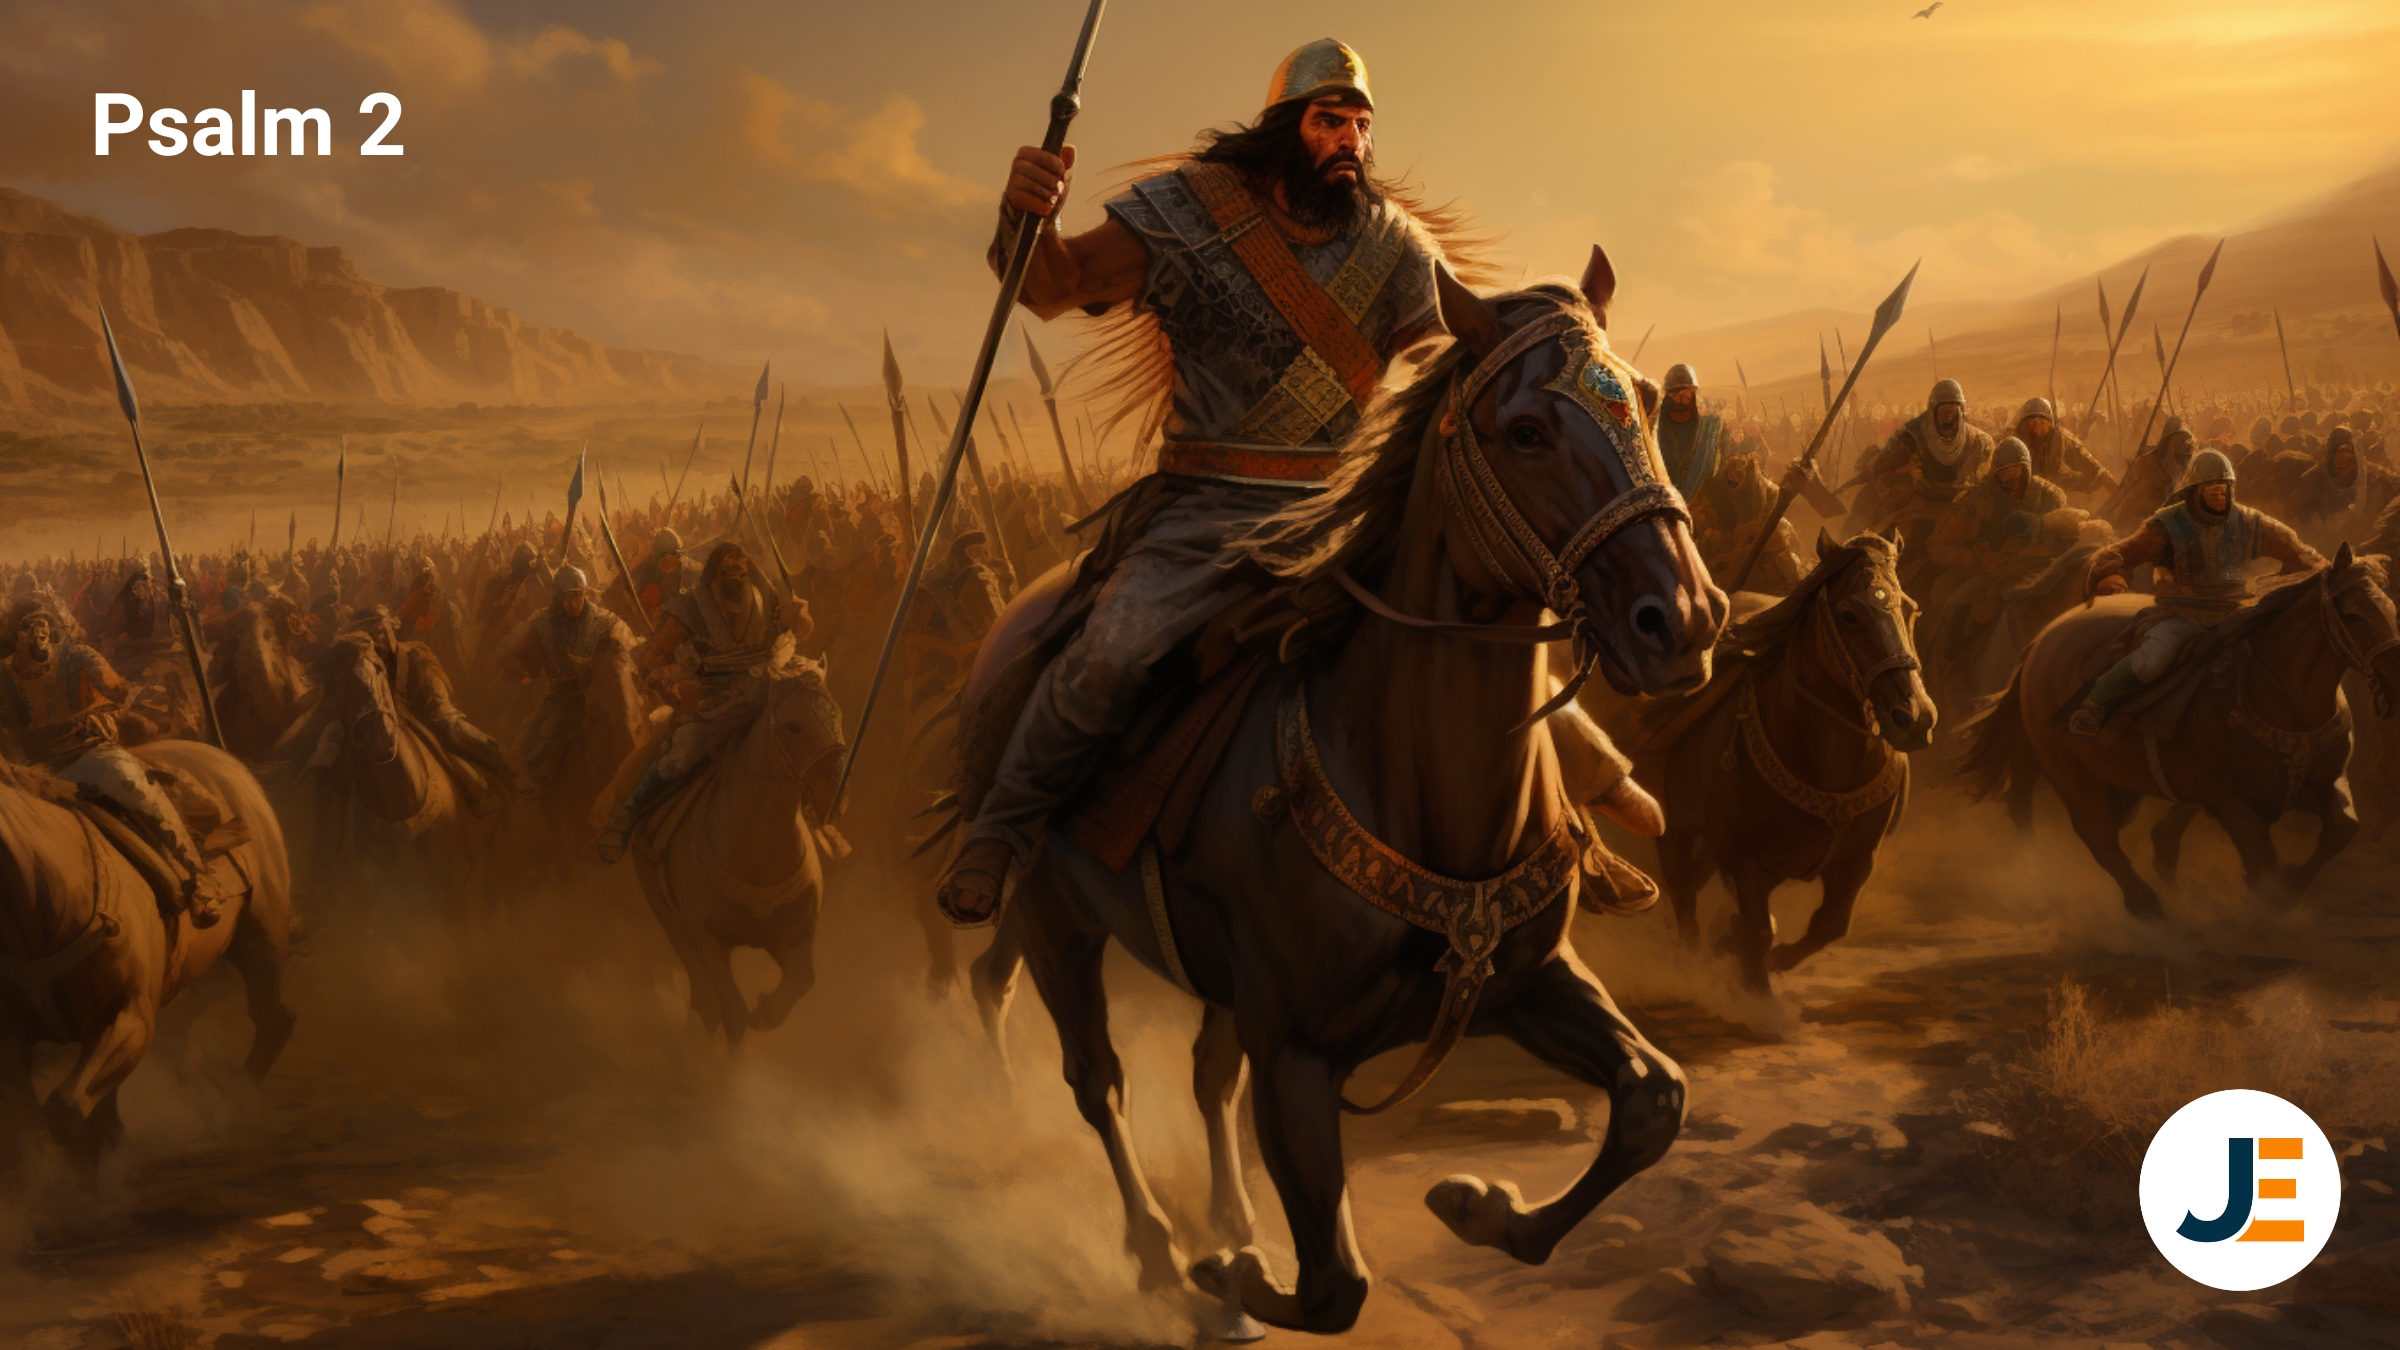 an ancient mesopotamian army riding into battle with swords on a desert battlefield, Israel battle, psalm 2